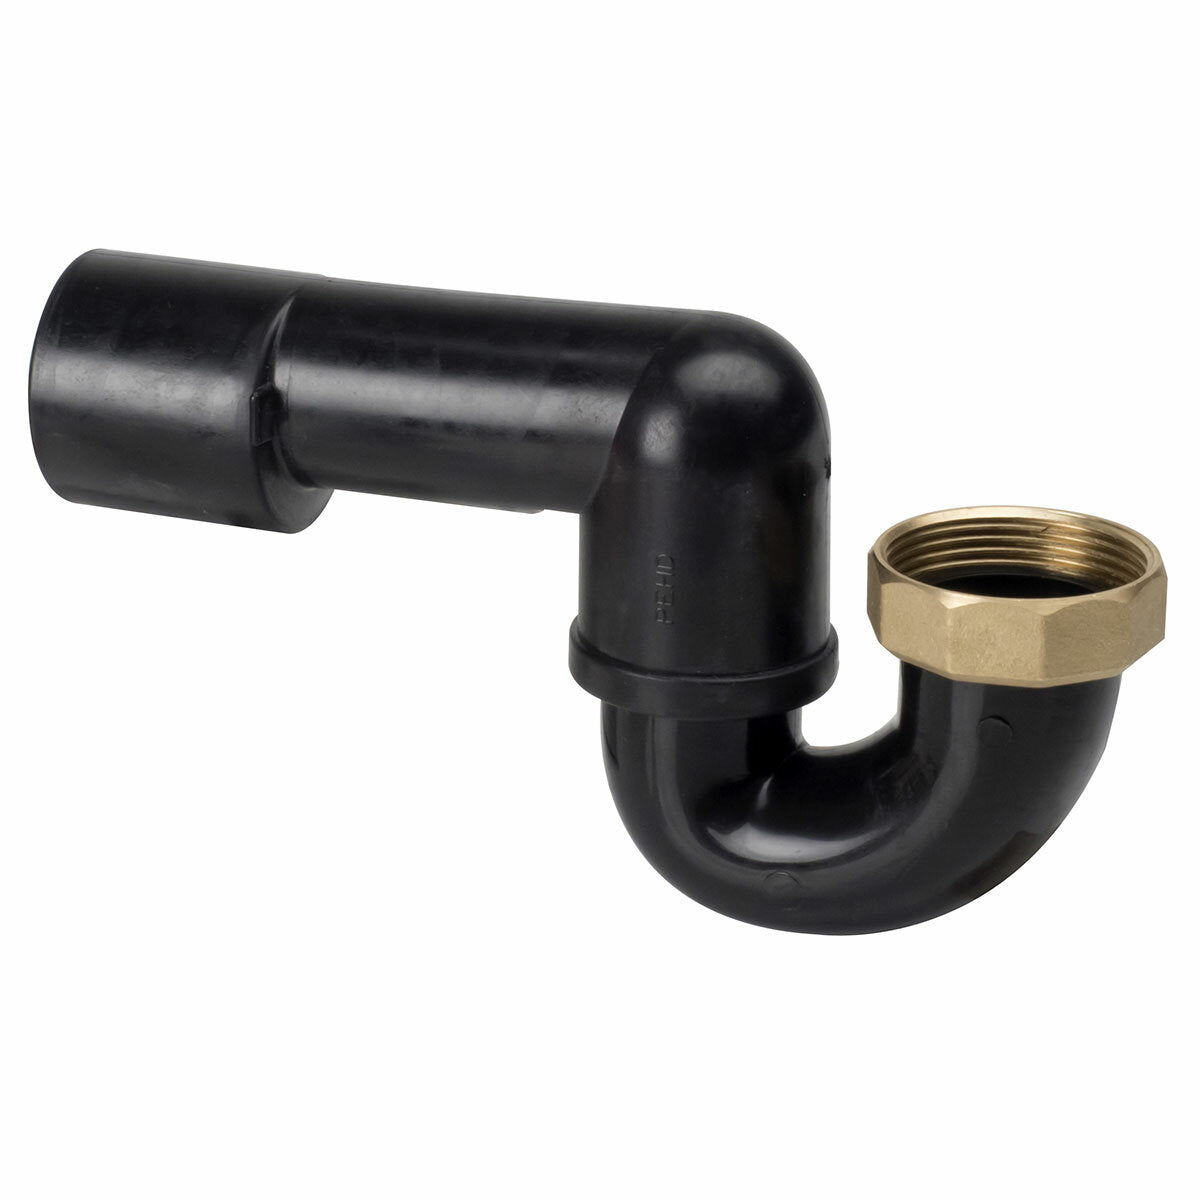 Valsir C2 siphon in HDPE for bath drain with brass nut, connection to be welded, low versiomn